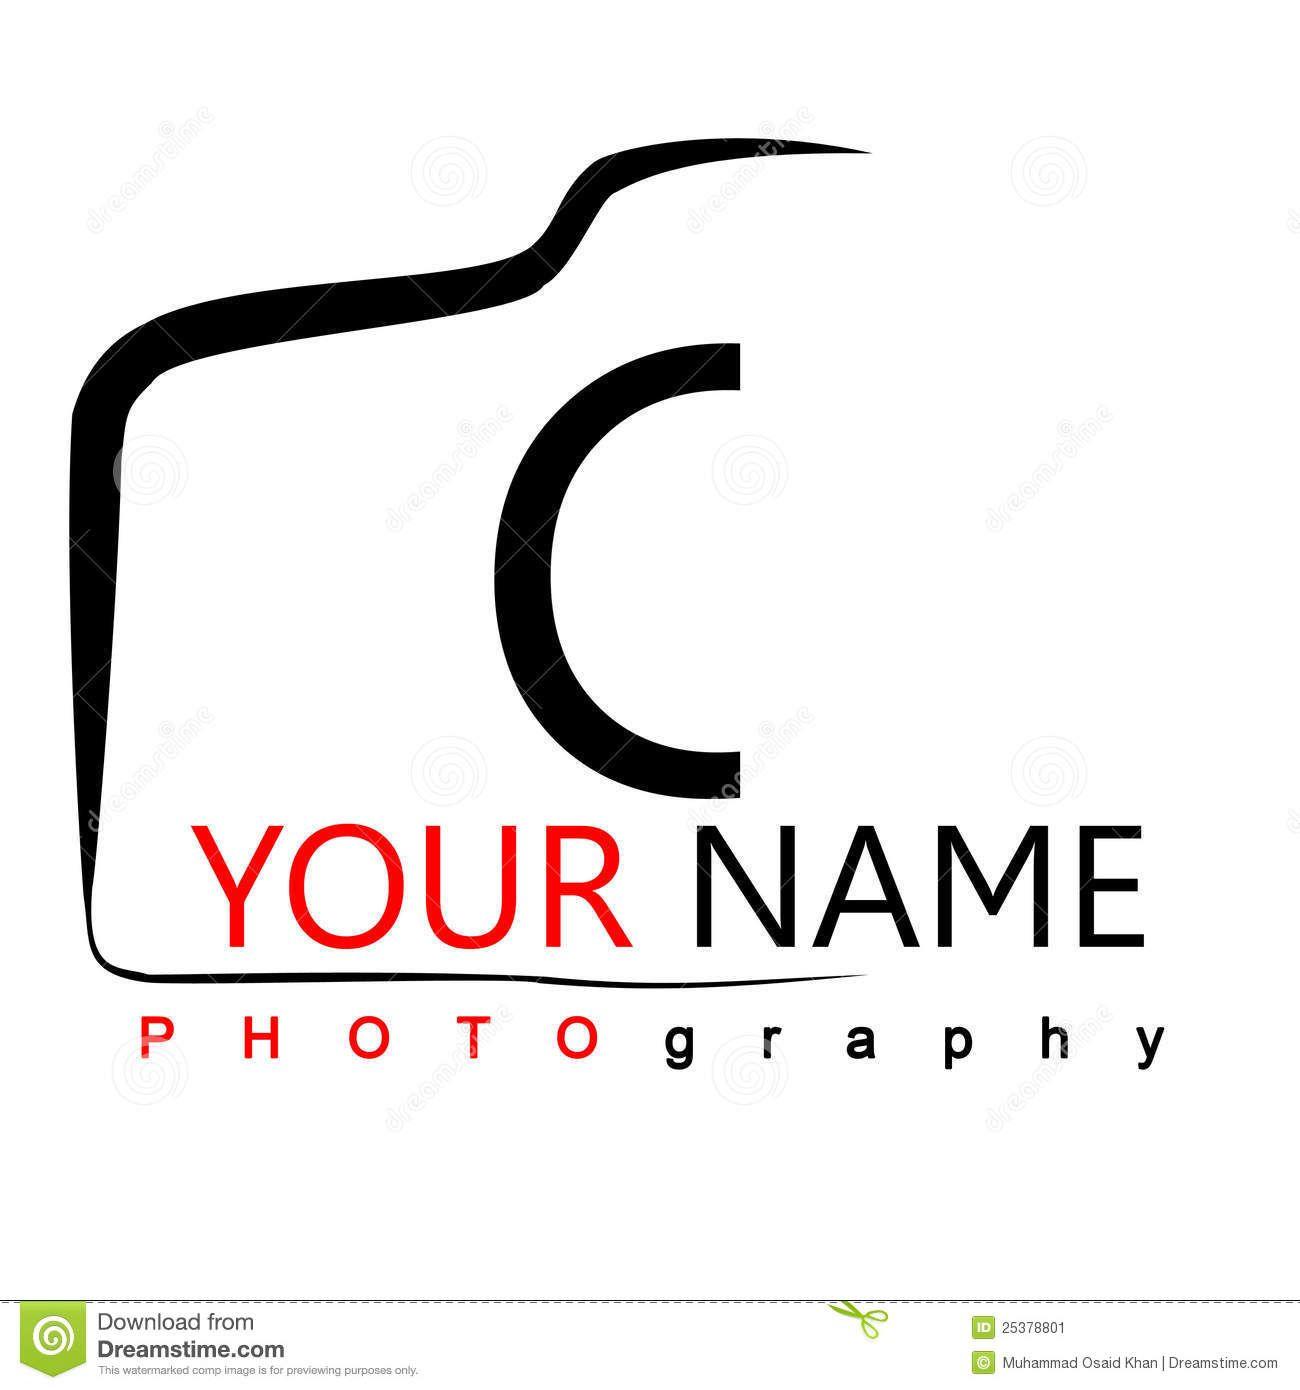 Camer Logo - Camera Logo - Download From Over 60 Million High Quality Stock ...